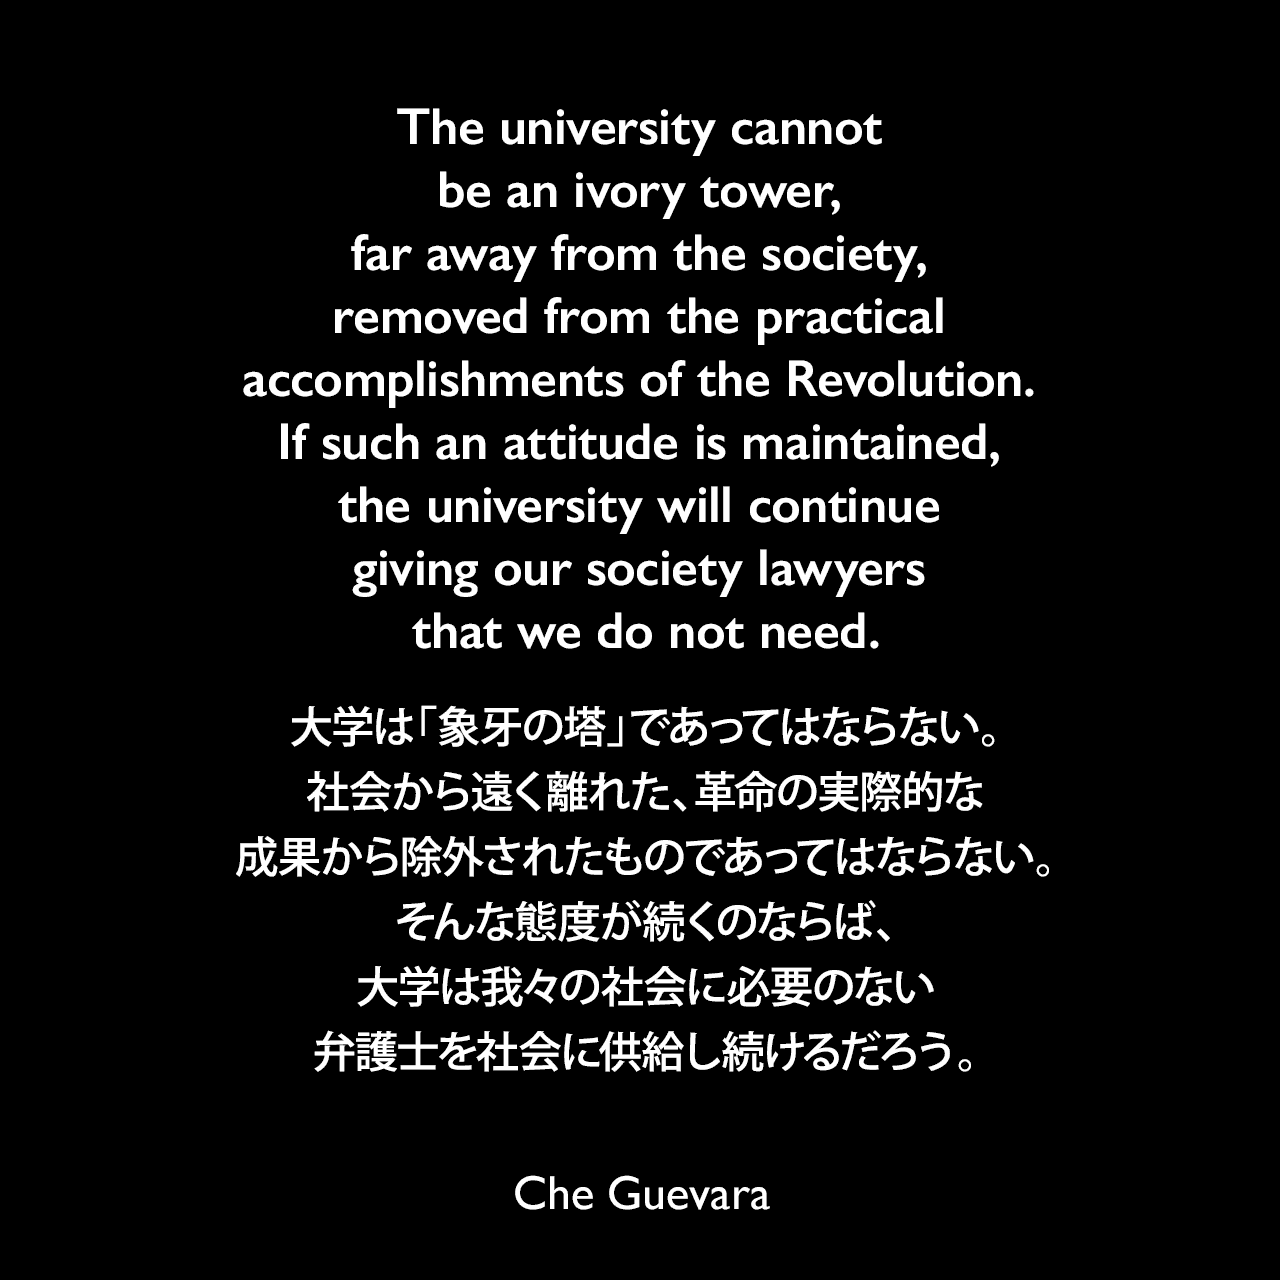 The university cannot be an ivory tower, far away from the society, removed from the practical accomplishments of the Revolution. If such an attitude is maintained, the university will continue giving our society lawyers that we do not need.大学は「象牙の塔」であってはならない。社会から遠く離れた、革命の実際的な成果から除外されたものであってはならない。そんな態度が続くのならば、大学は我々の社会に必要のない弁護士を社会に供給し続けるだろう。- 1959年10月17日 チェ・ゲバラの大学生へのスピーチよりChe Guevara